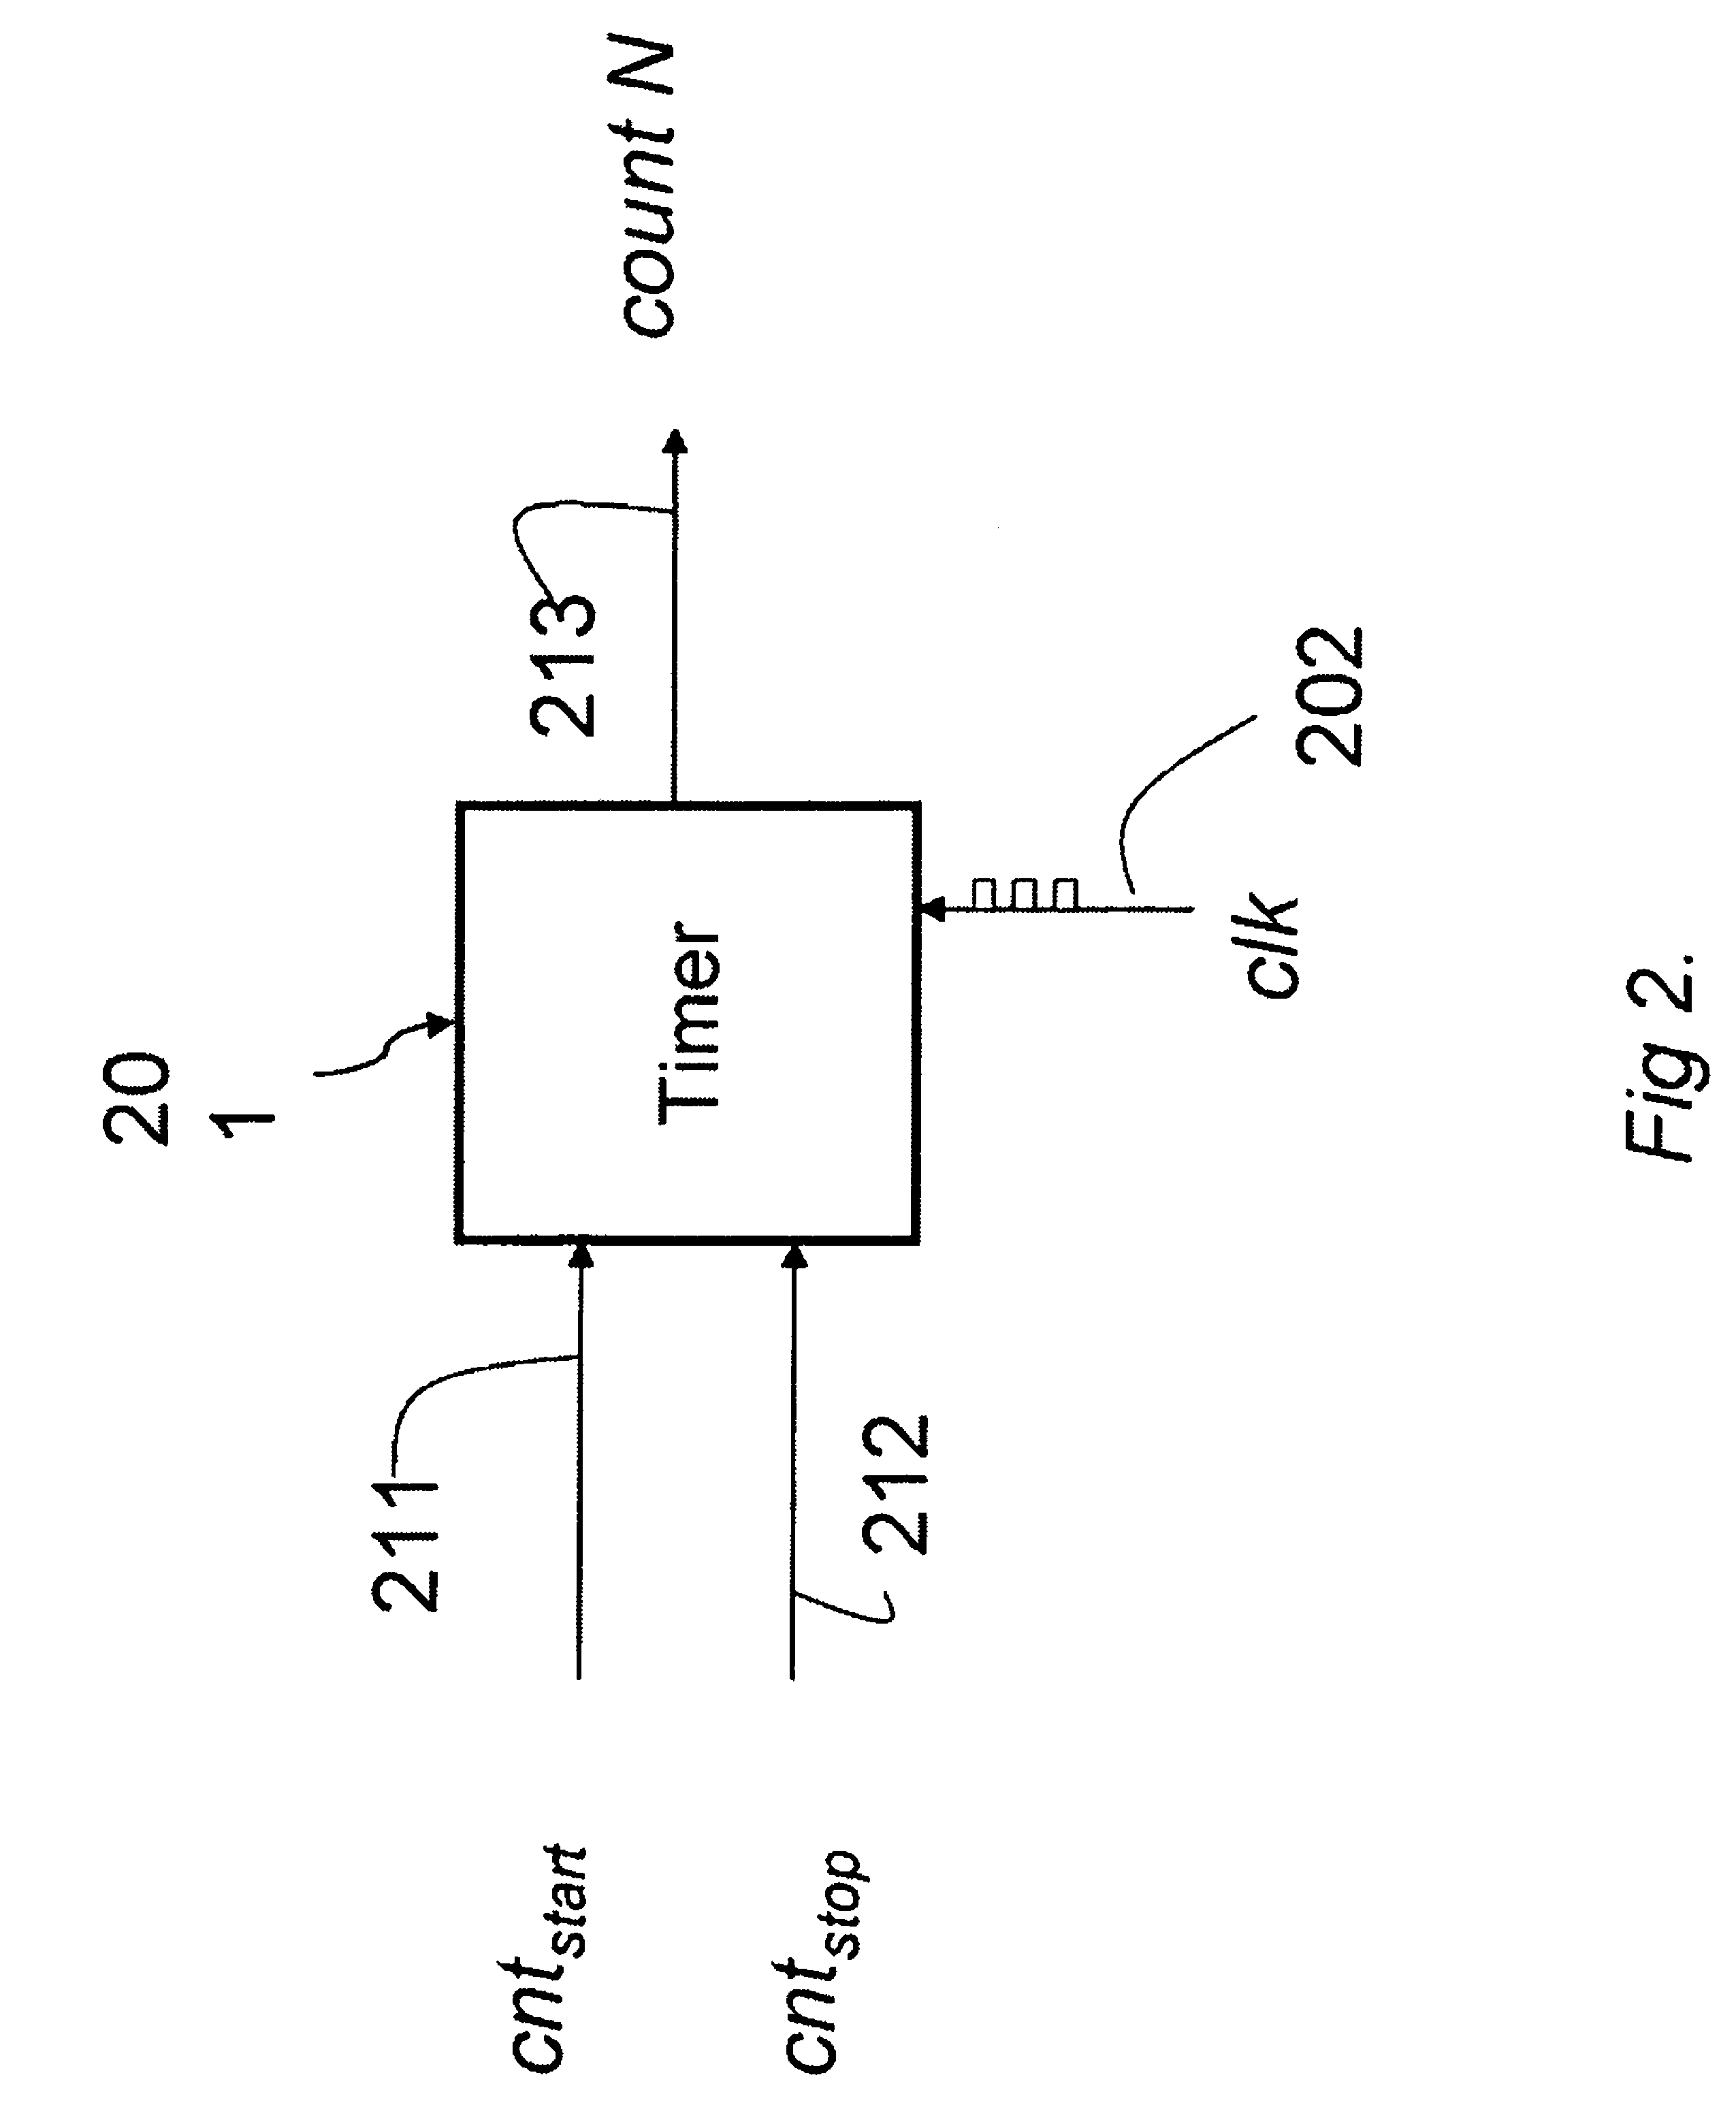 Method for estimating relative clock frequency offsets to improve radio ranging errors